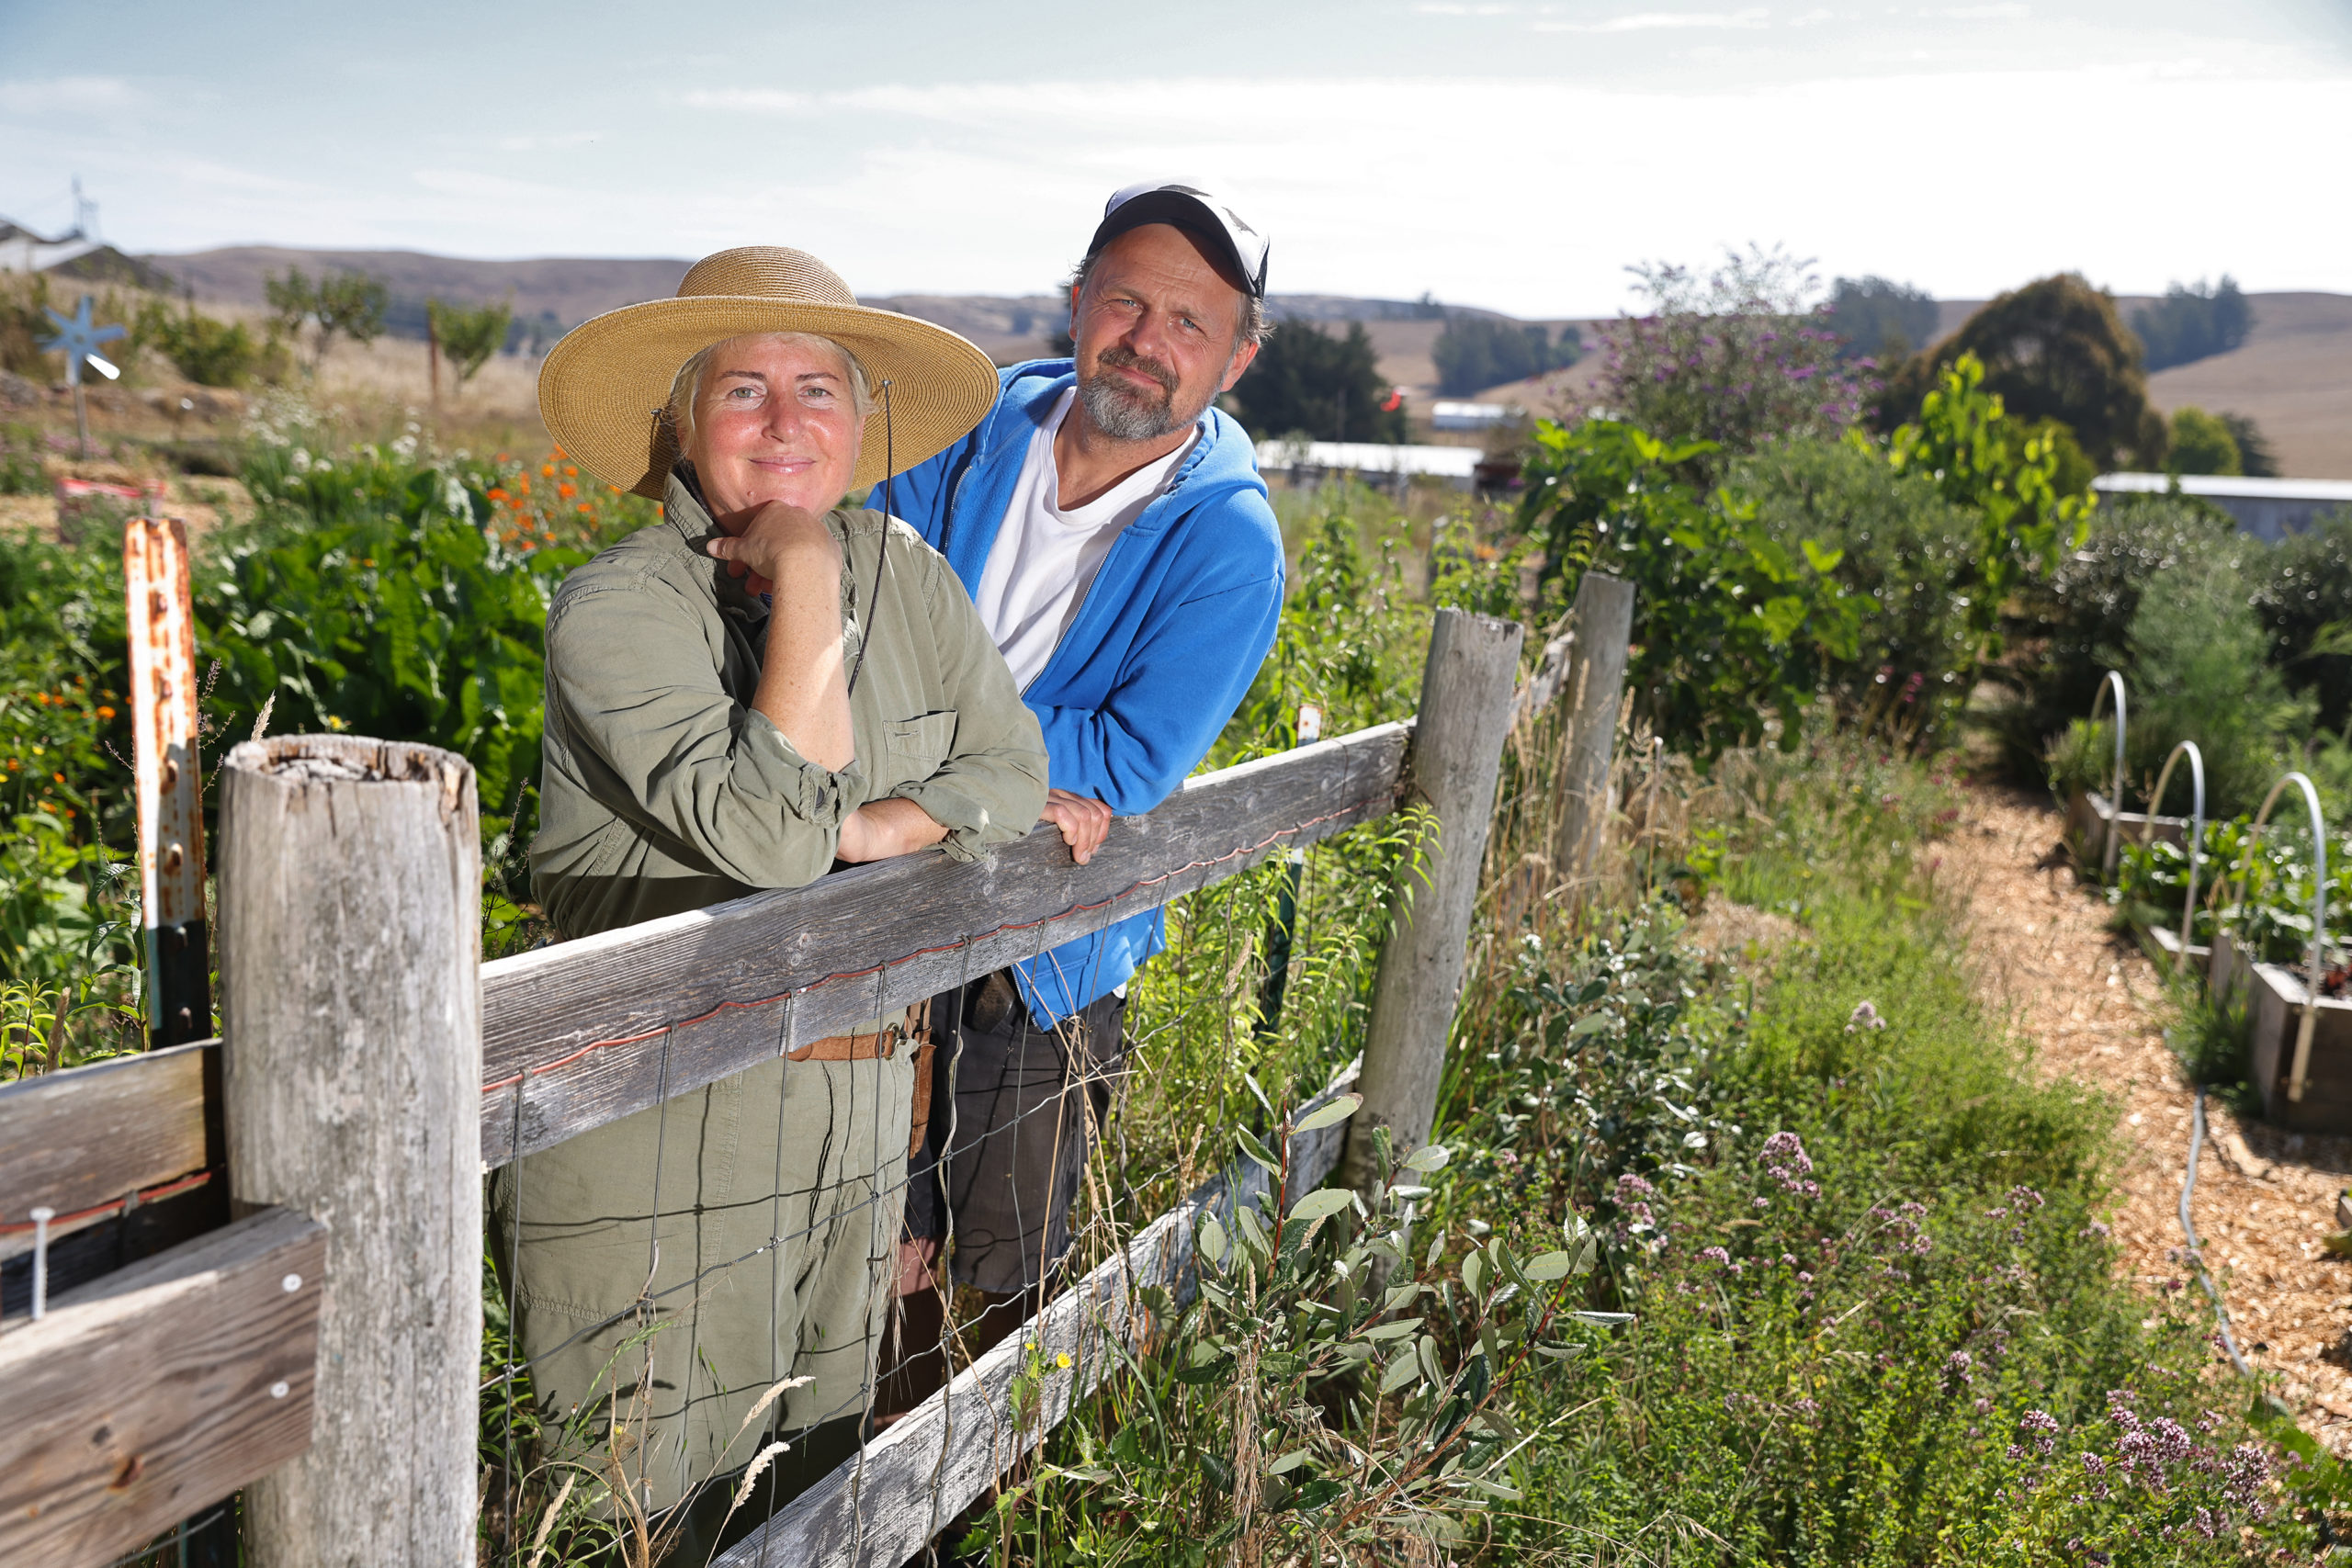 Veva Edelson and Karel Sidorjak are the proprietors of Piano Farm in Bloomfield. (Christopher Chung/ The Press Democrat)